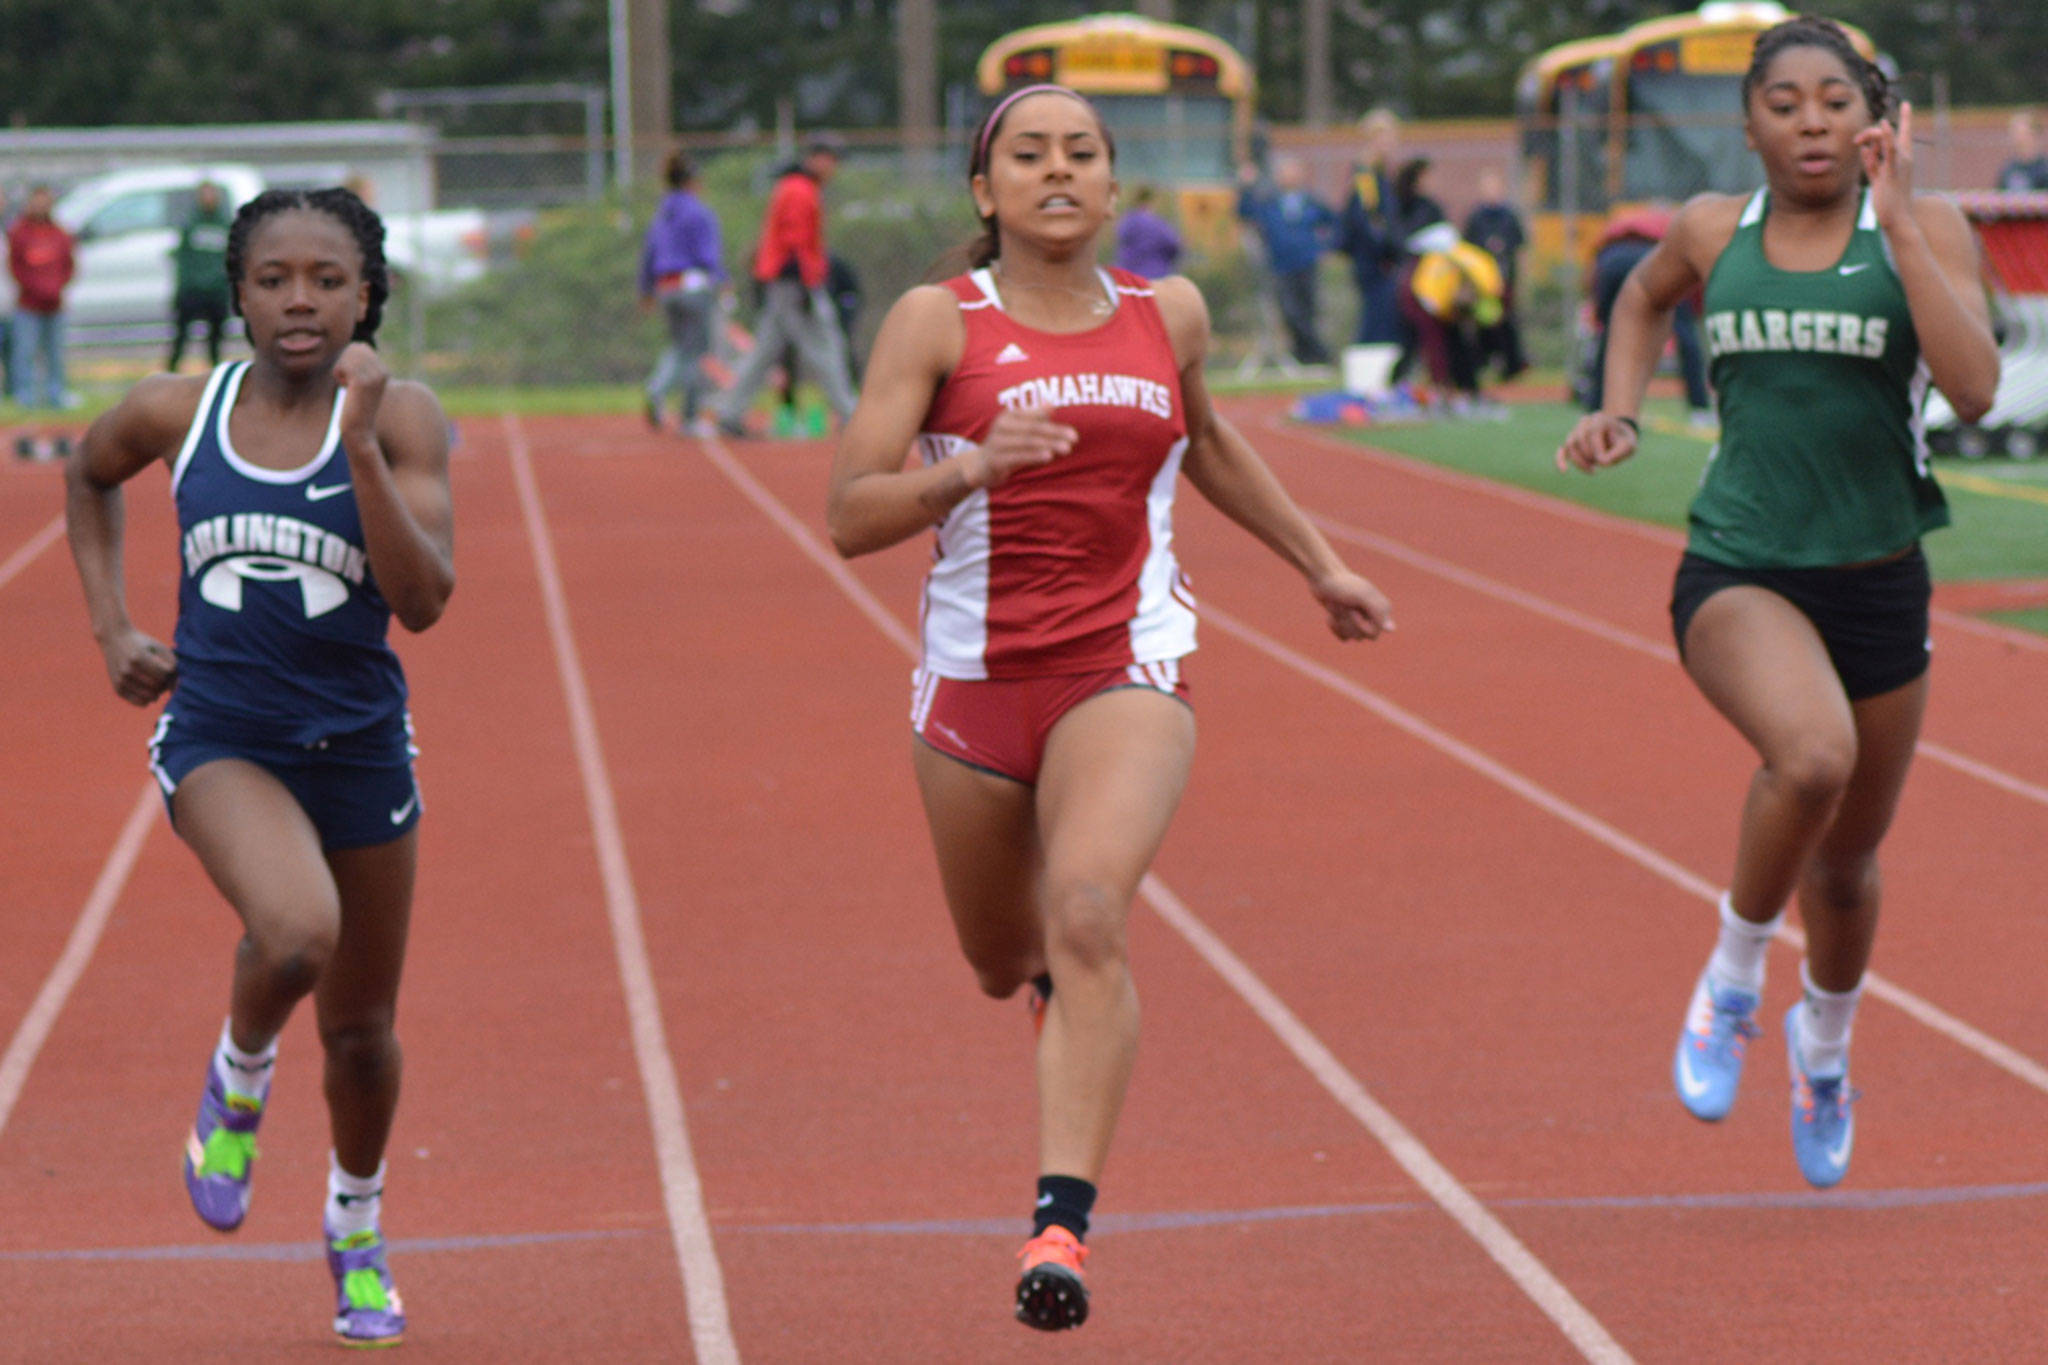 Trina Davis of M-P wins a race earlier in the week. She also won the 100 meters in Friday’s City Championships. (Steve Powell/Staff Photo)